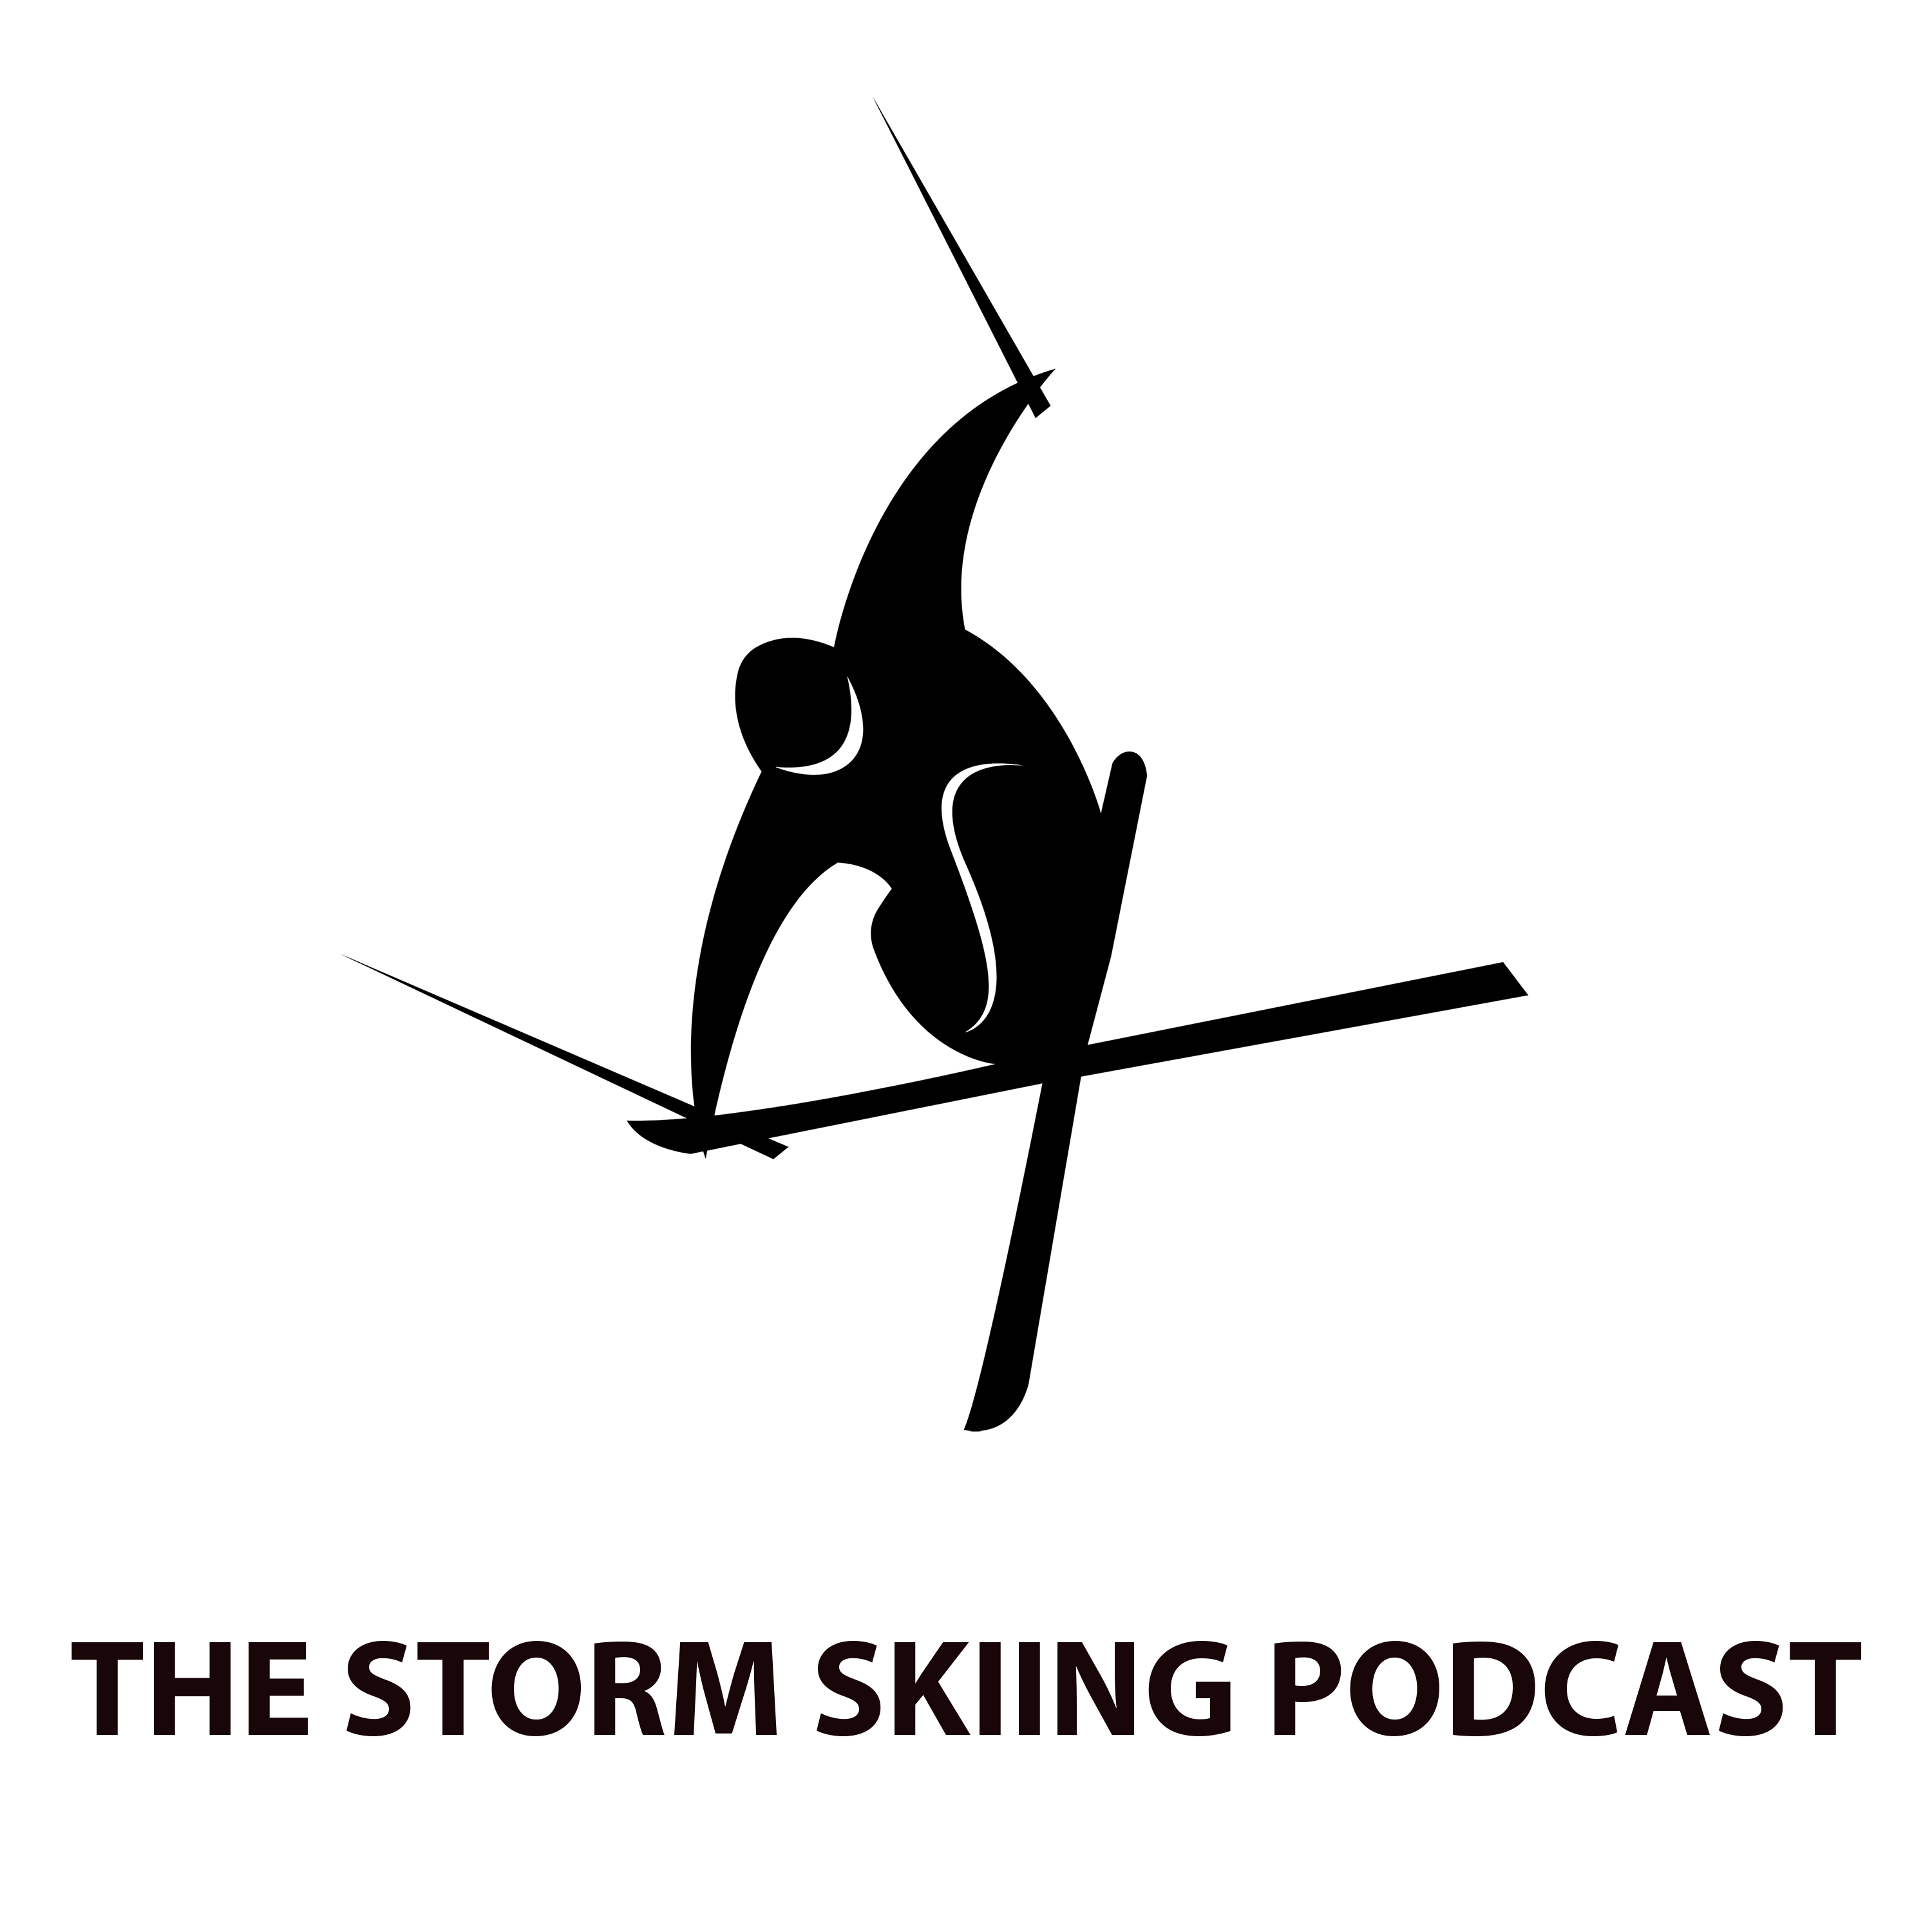 COVID-19 & Skiing Podcast #10: NSAA Director of Risk and Regulatory Affairs Dave Byrd – Why Skiing Needs Visa Workers